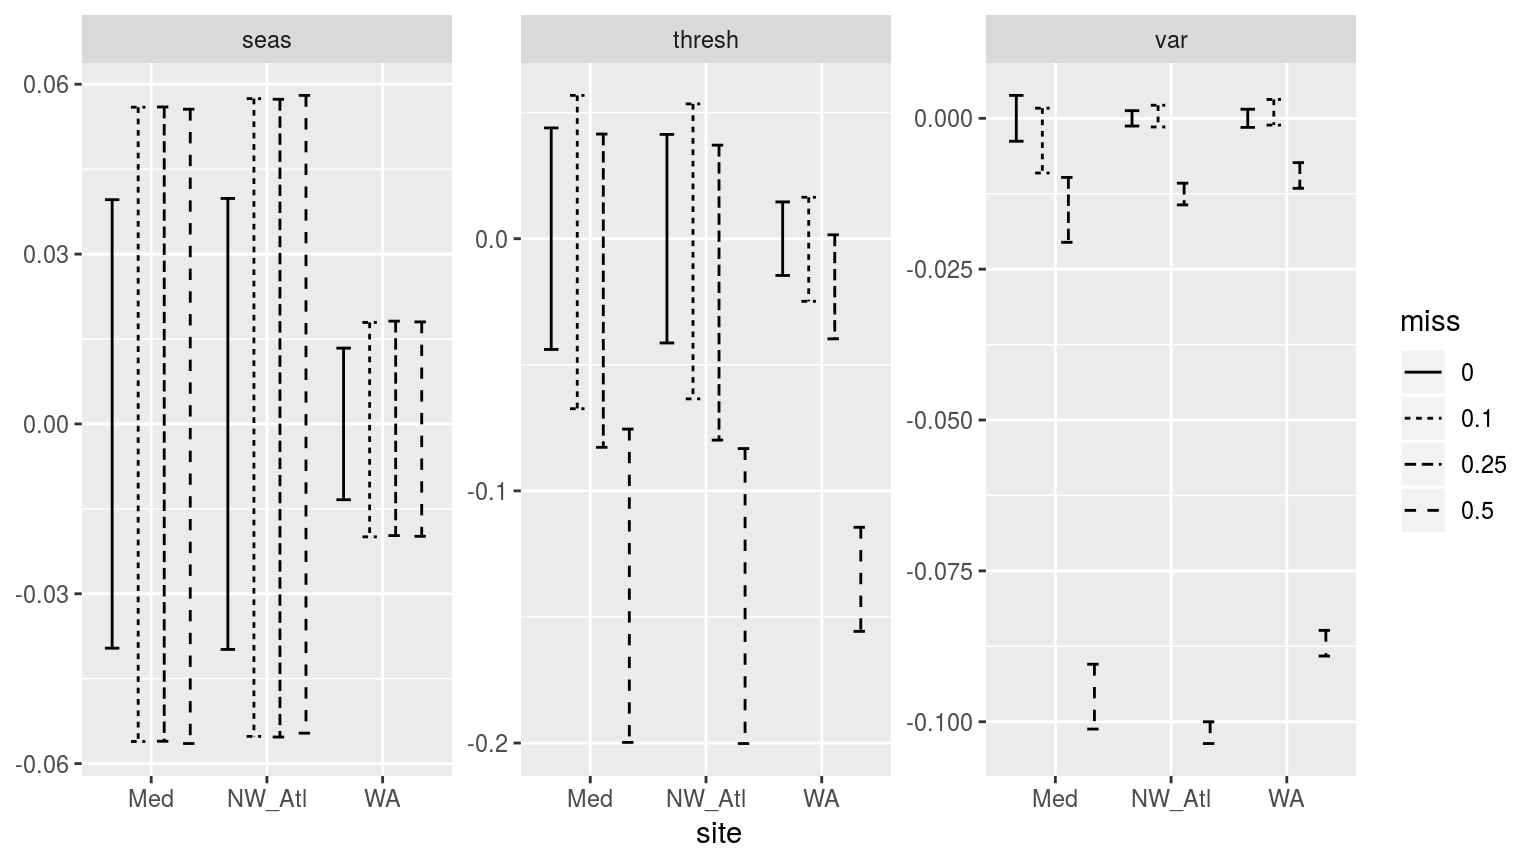 Confidence intervals of the different metrics for the three different clim periods given varrying proportions of missing data.